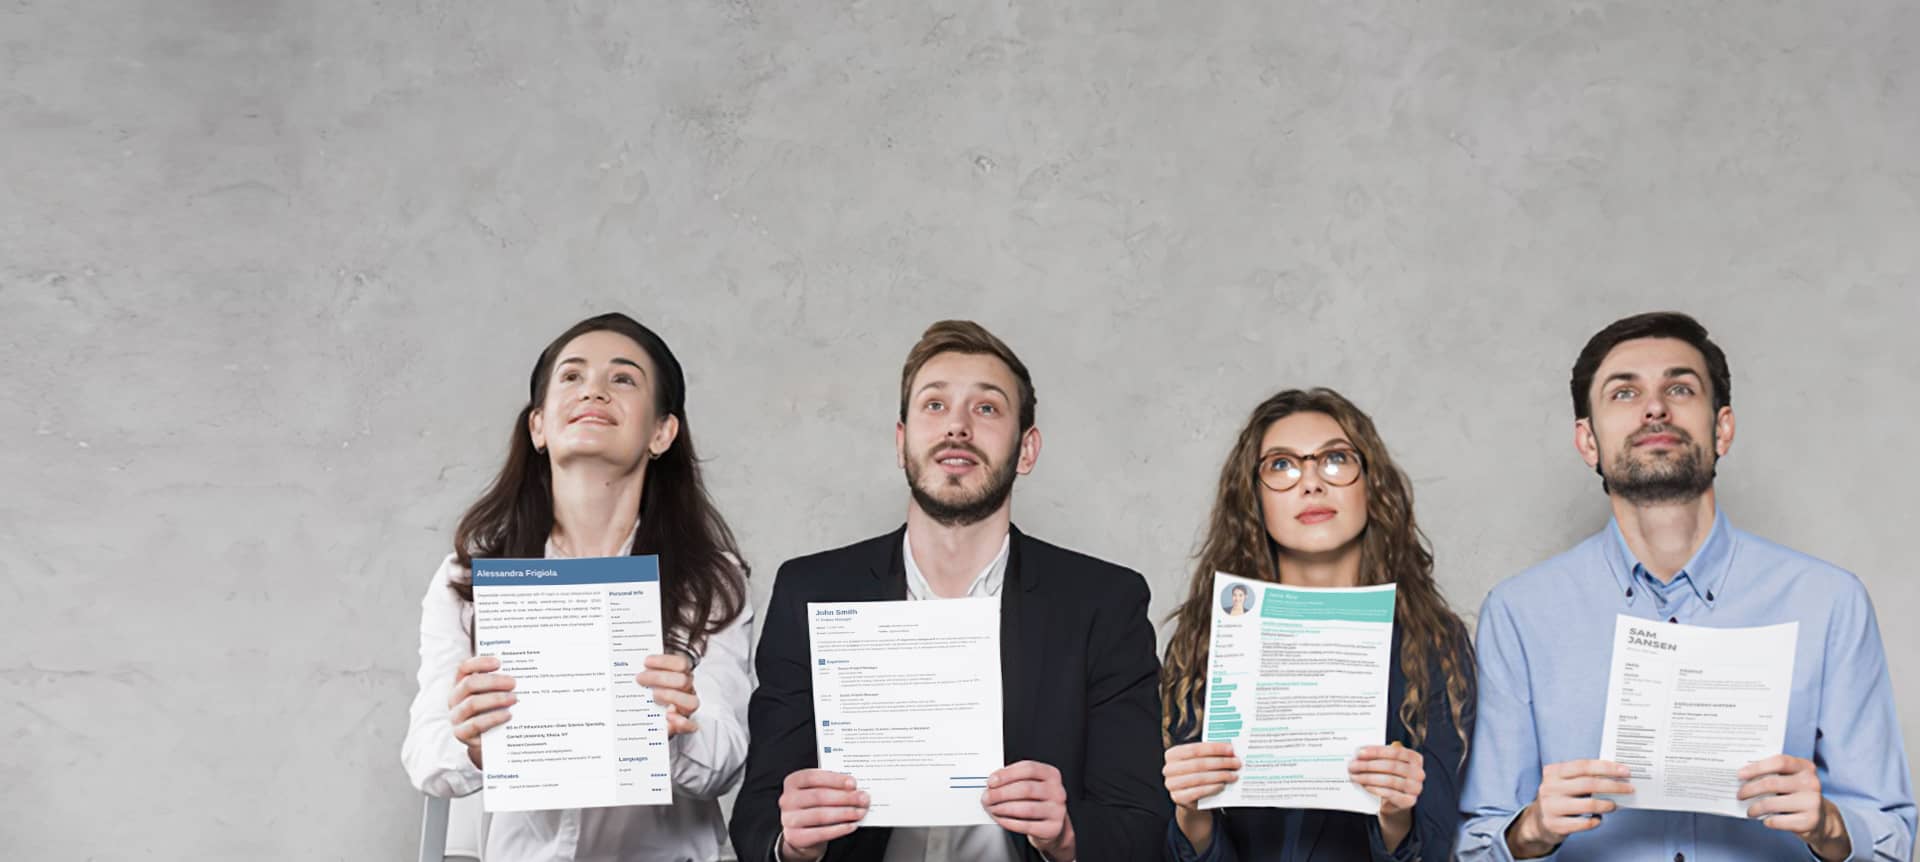 How to Write a Job Winning CV That Stands Out